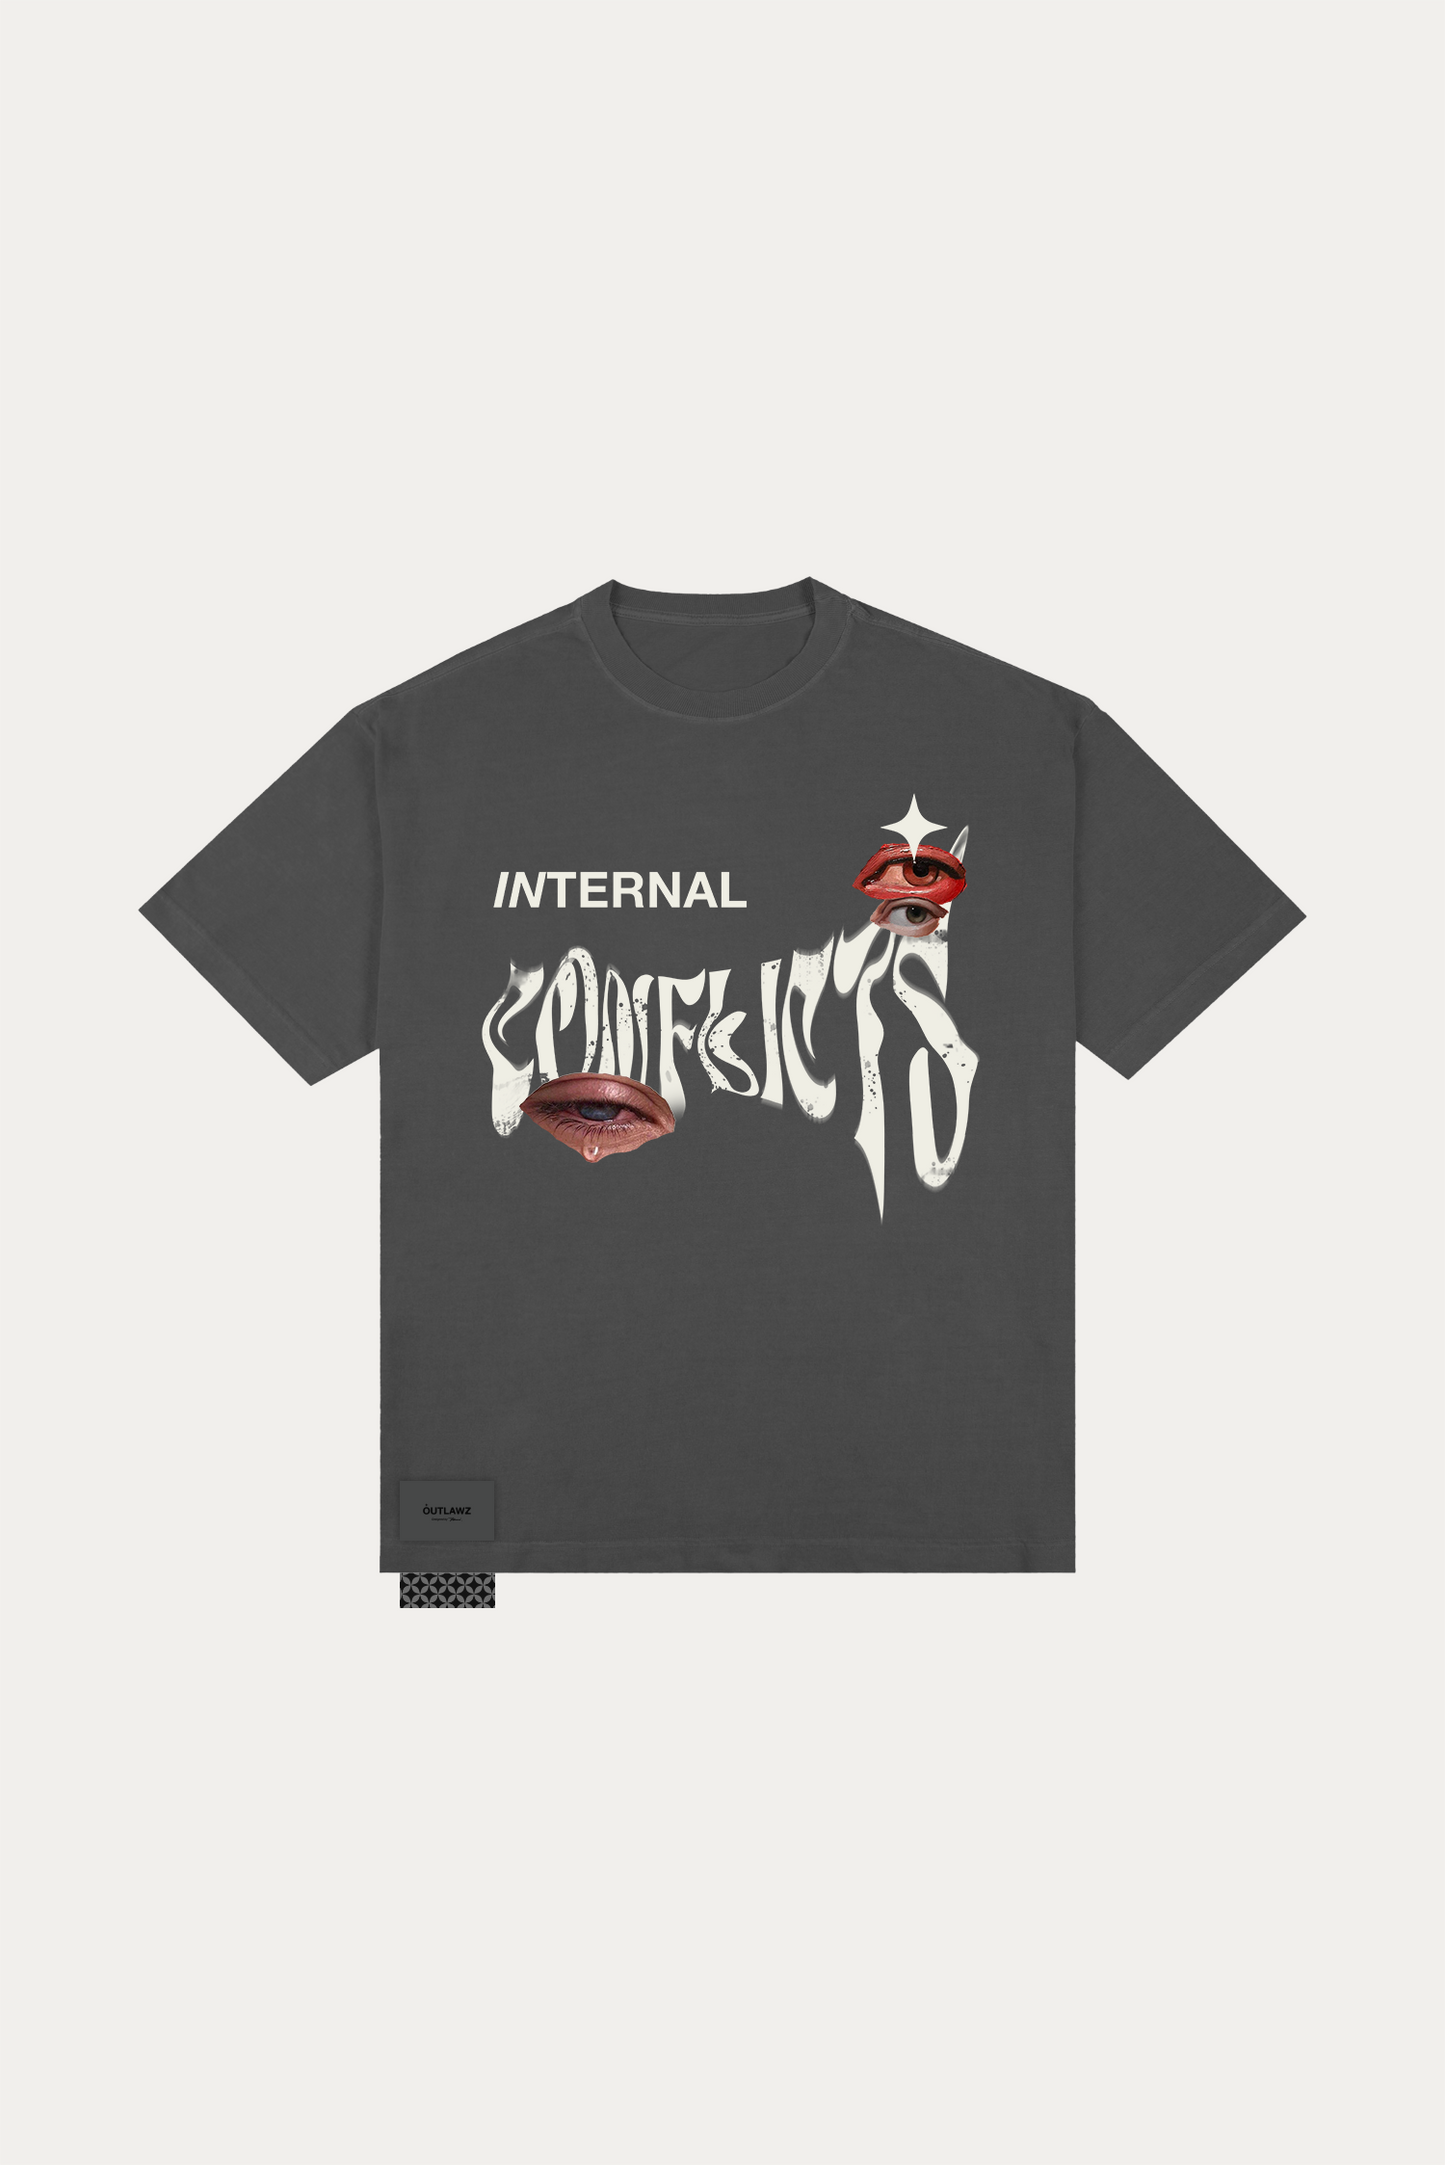 T-shirt Over Boxy "INTERNAL CONFLICTS" - Cinza